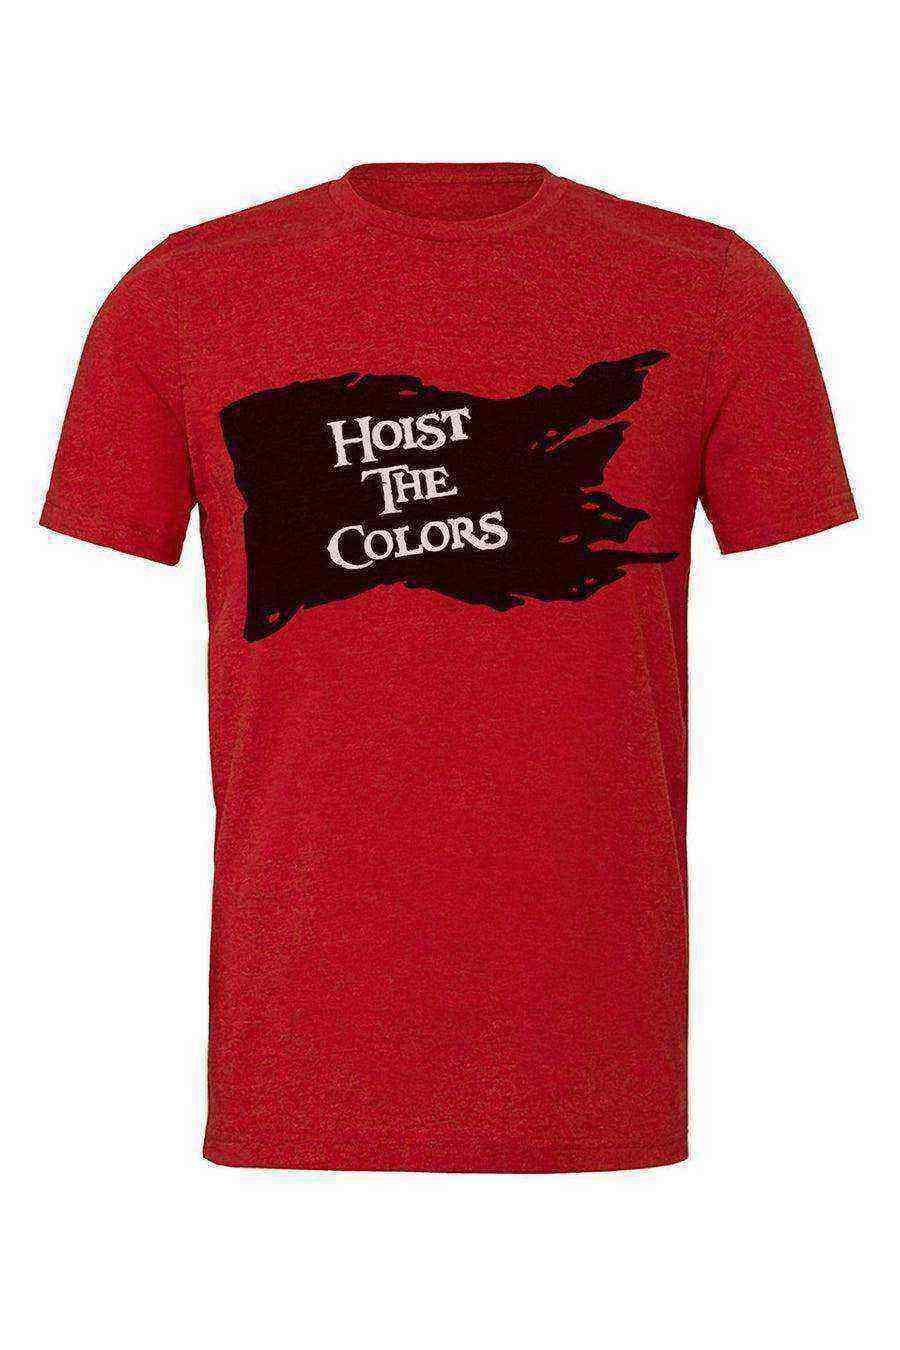 Hoist The Colors - Dylan's Tees